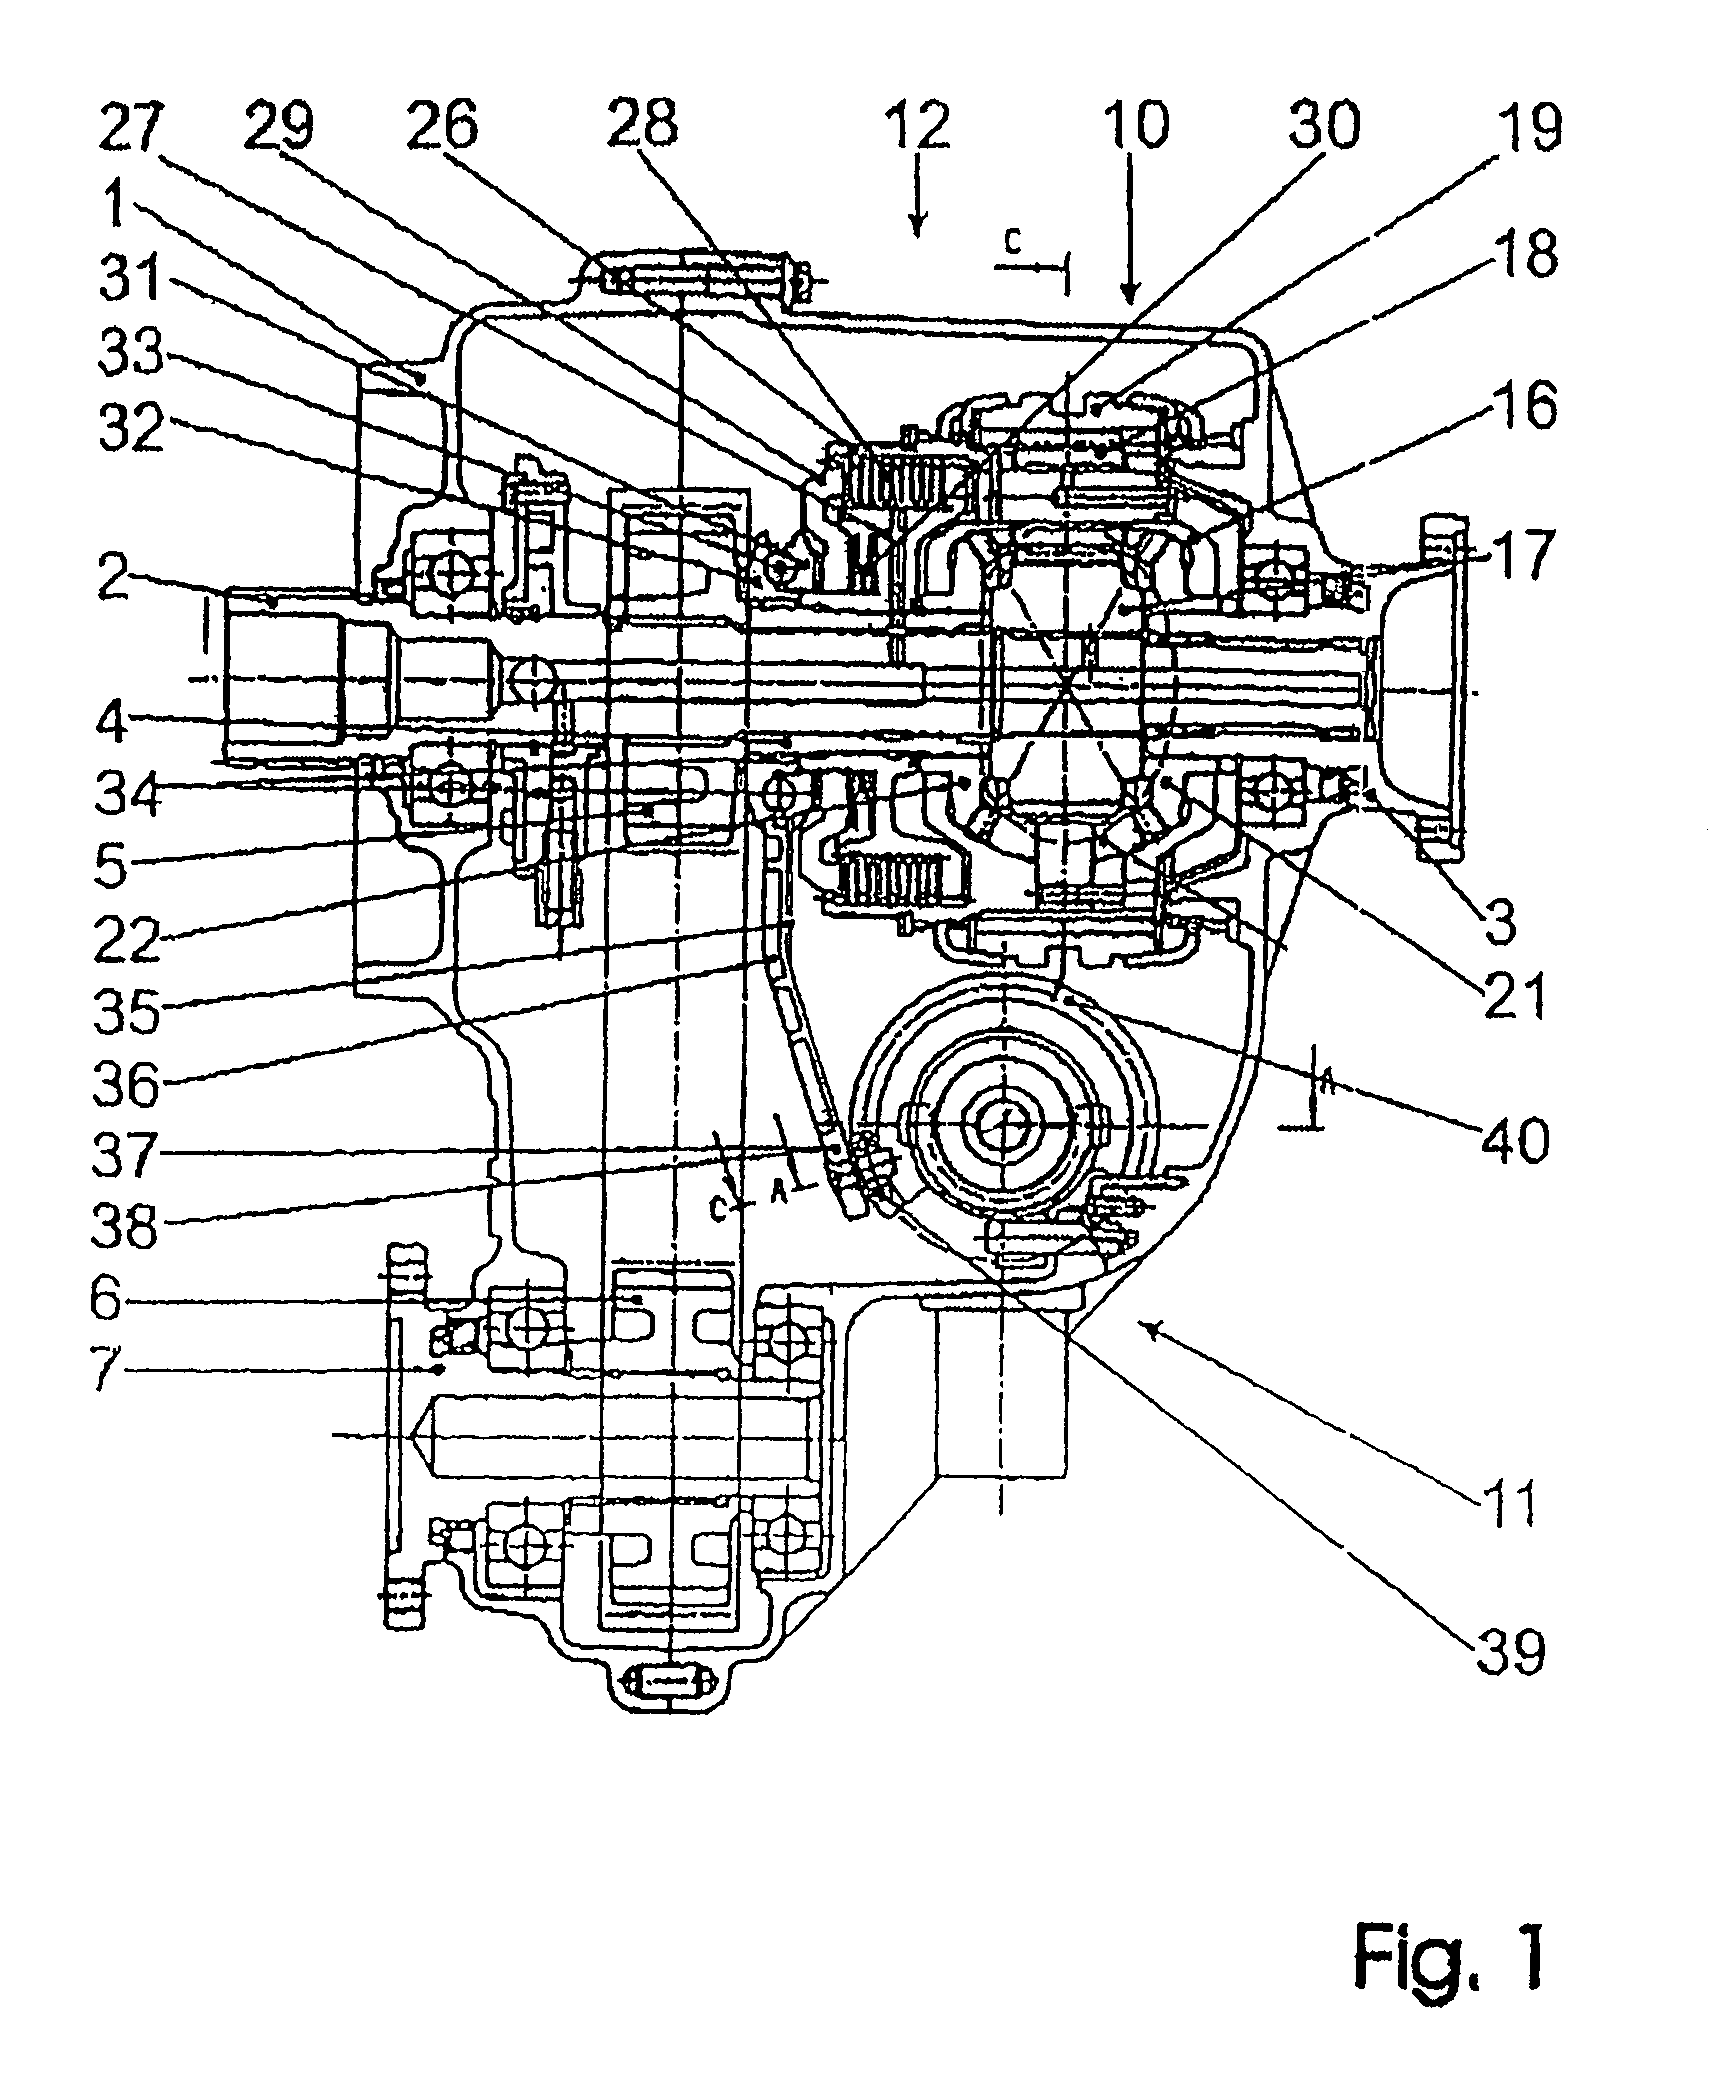 Device and method for adjusting the torque transmitted by a friction clutch